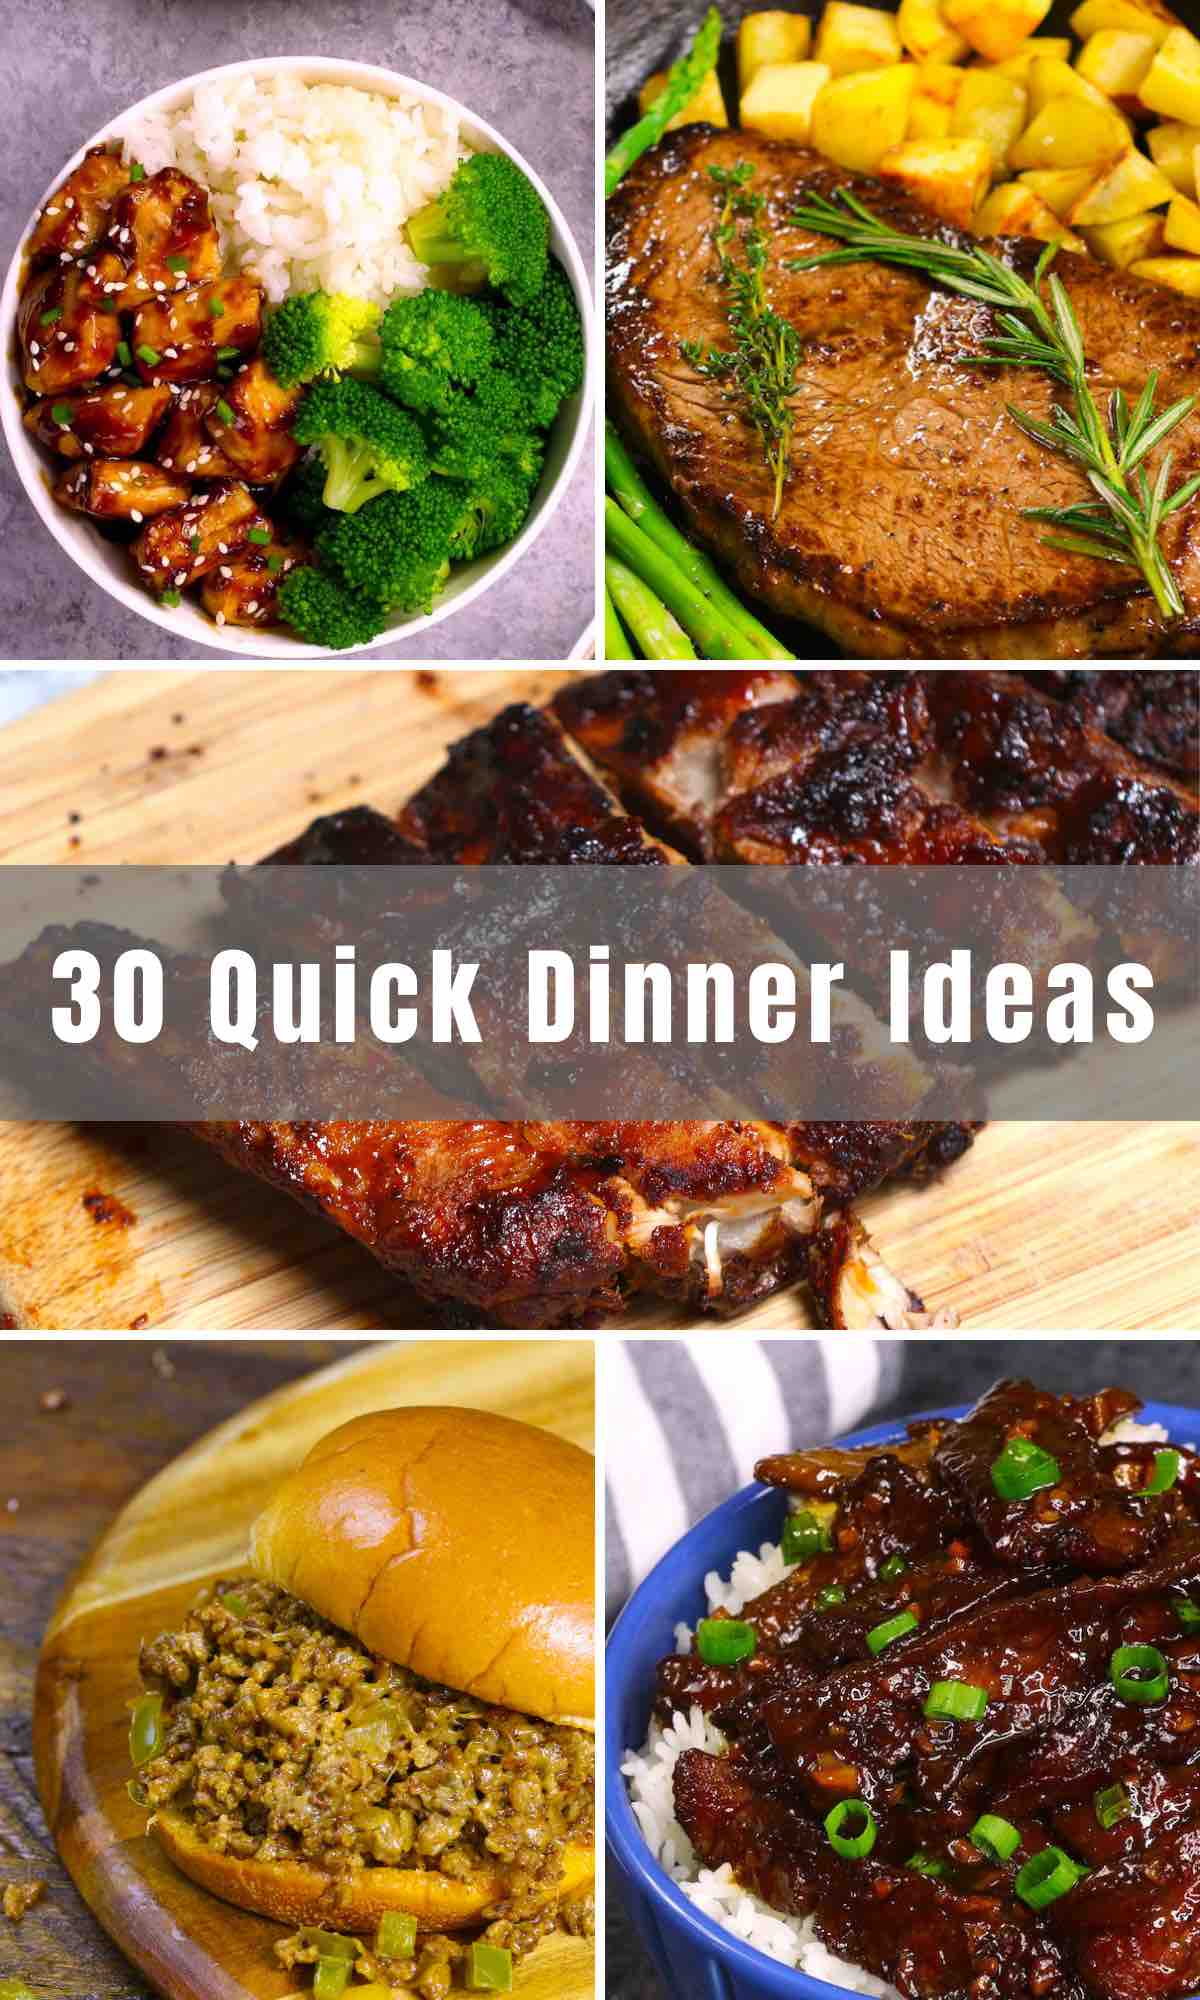 Whether you’re short on time, tired, or simply not in the mood to cook a big meal, these 30 Quick Dinner Ideas make it easy to enjoy a delicious meal on a busy weeknight. No more frozen pizza, ramen noodles, or restaurant take-out